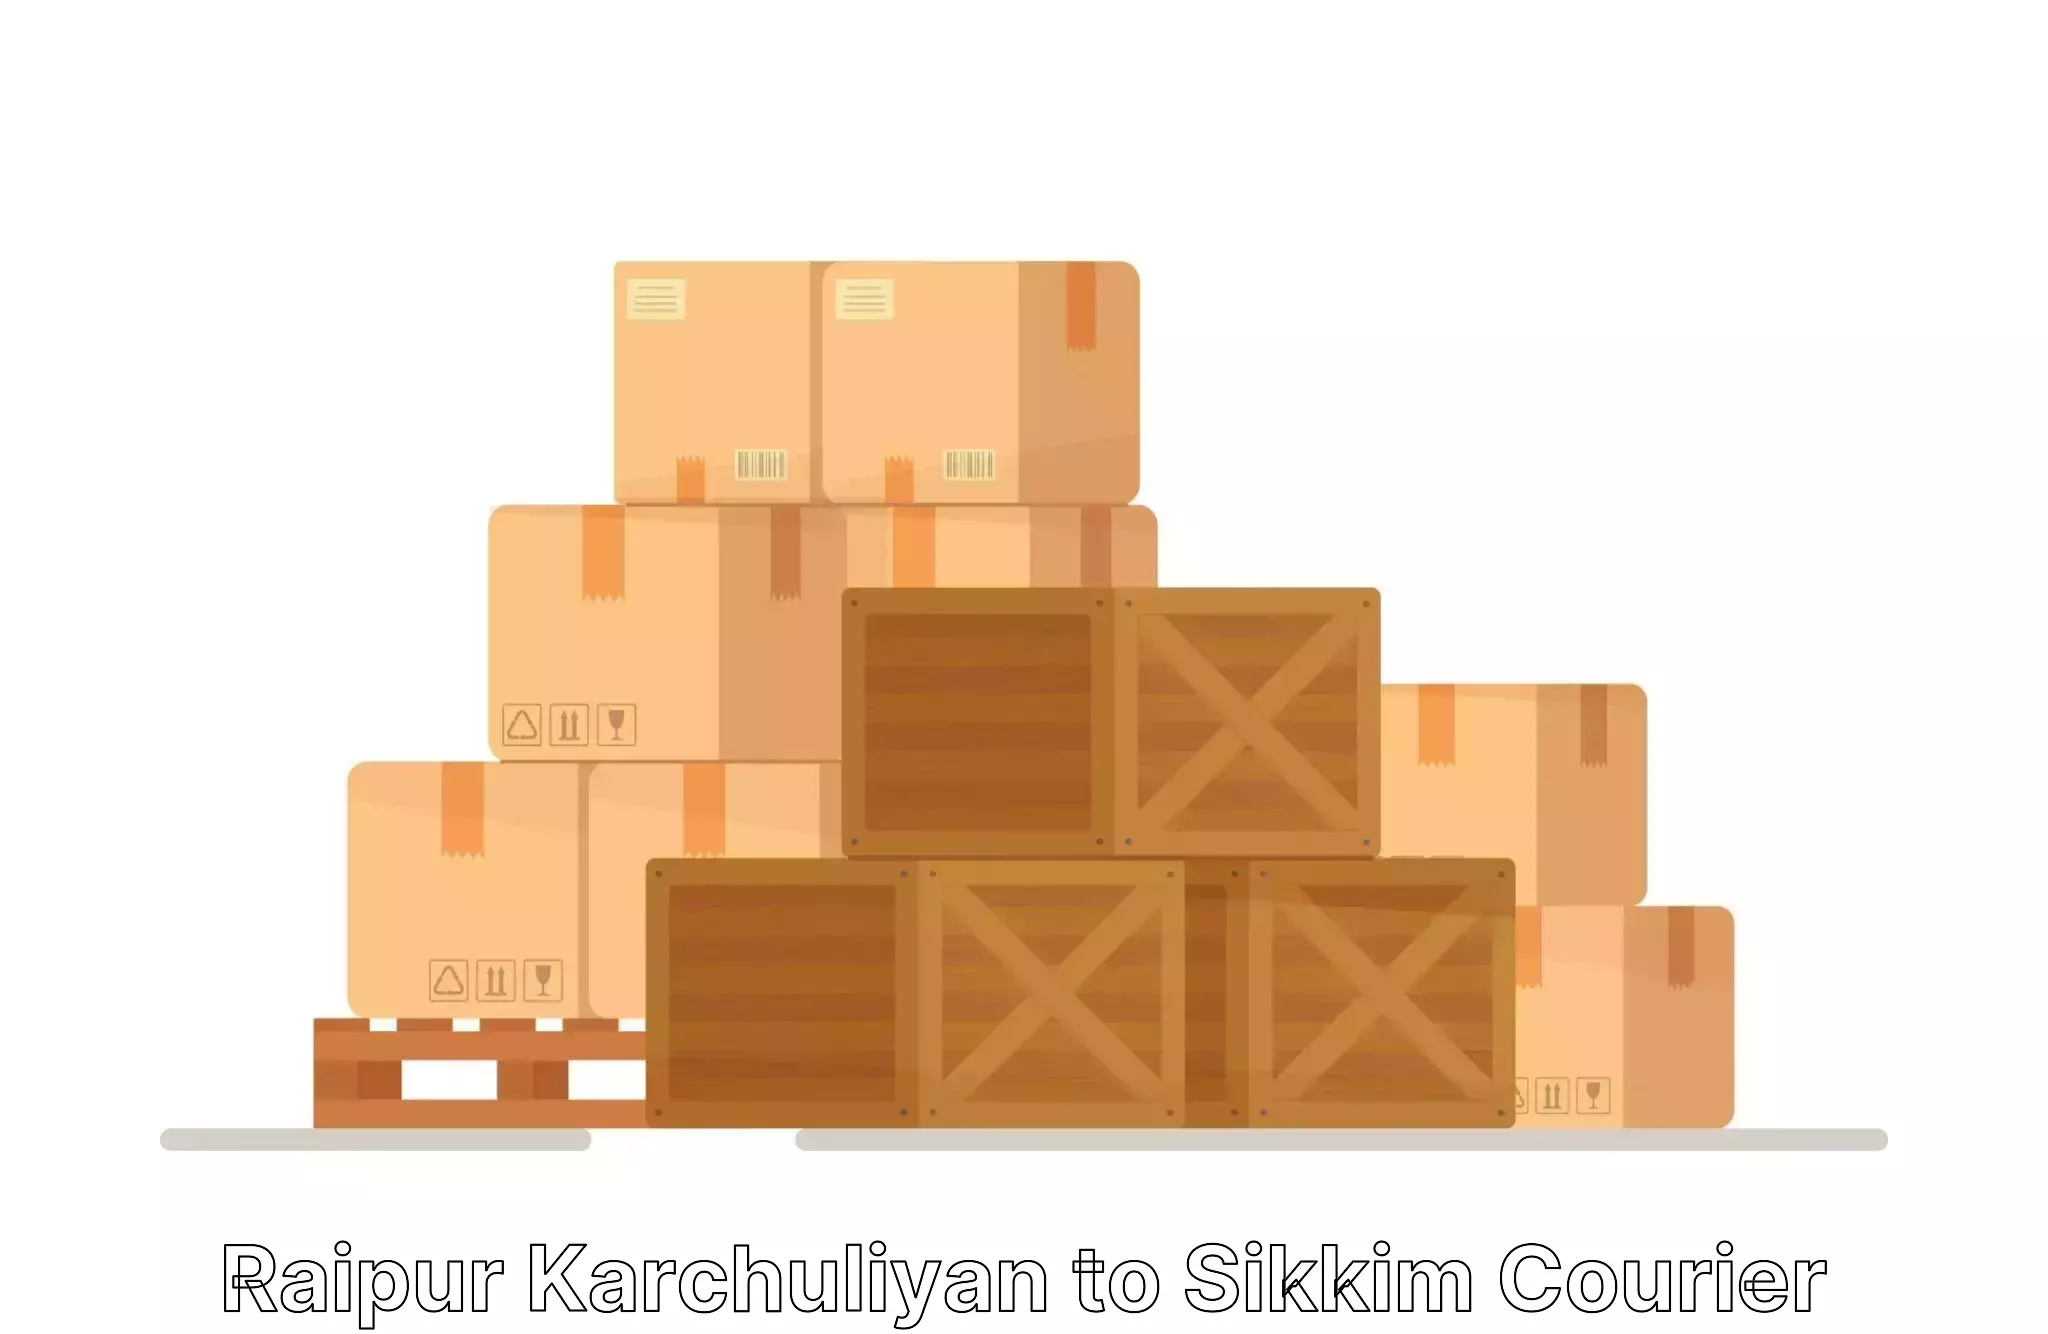 Budget-friendly movers Raipur Karchuliyan to East Sikkim